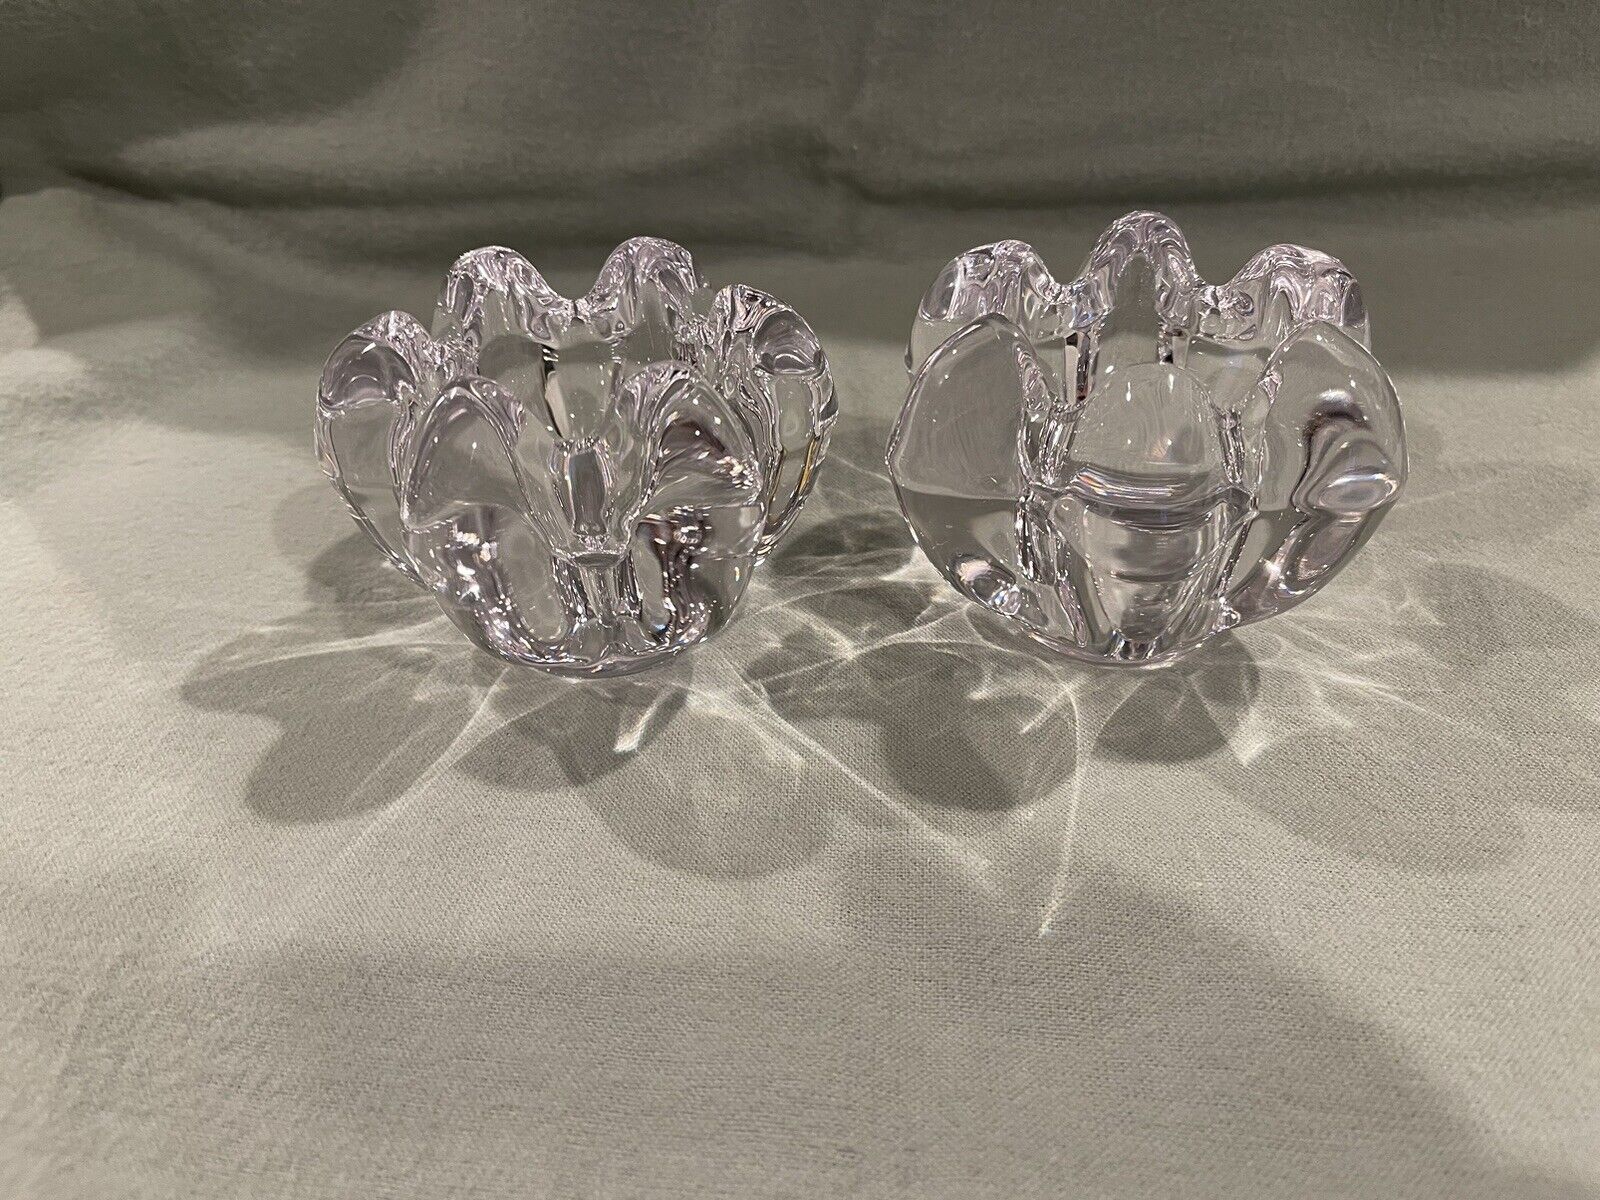 Exquisite Pair of ART Vannes Le Chatel France Crystal Candle or Votive Holders